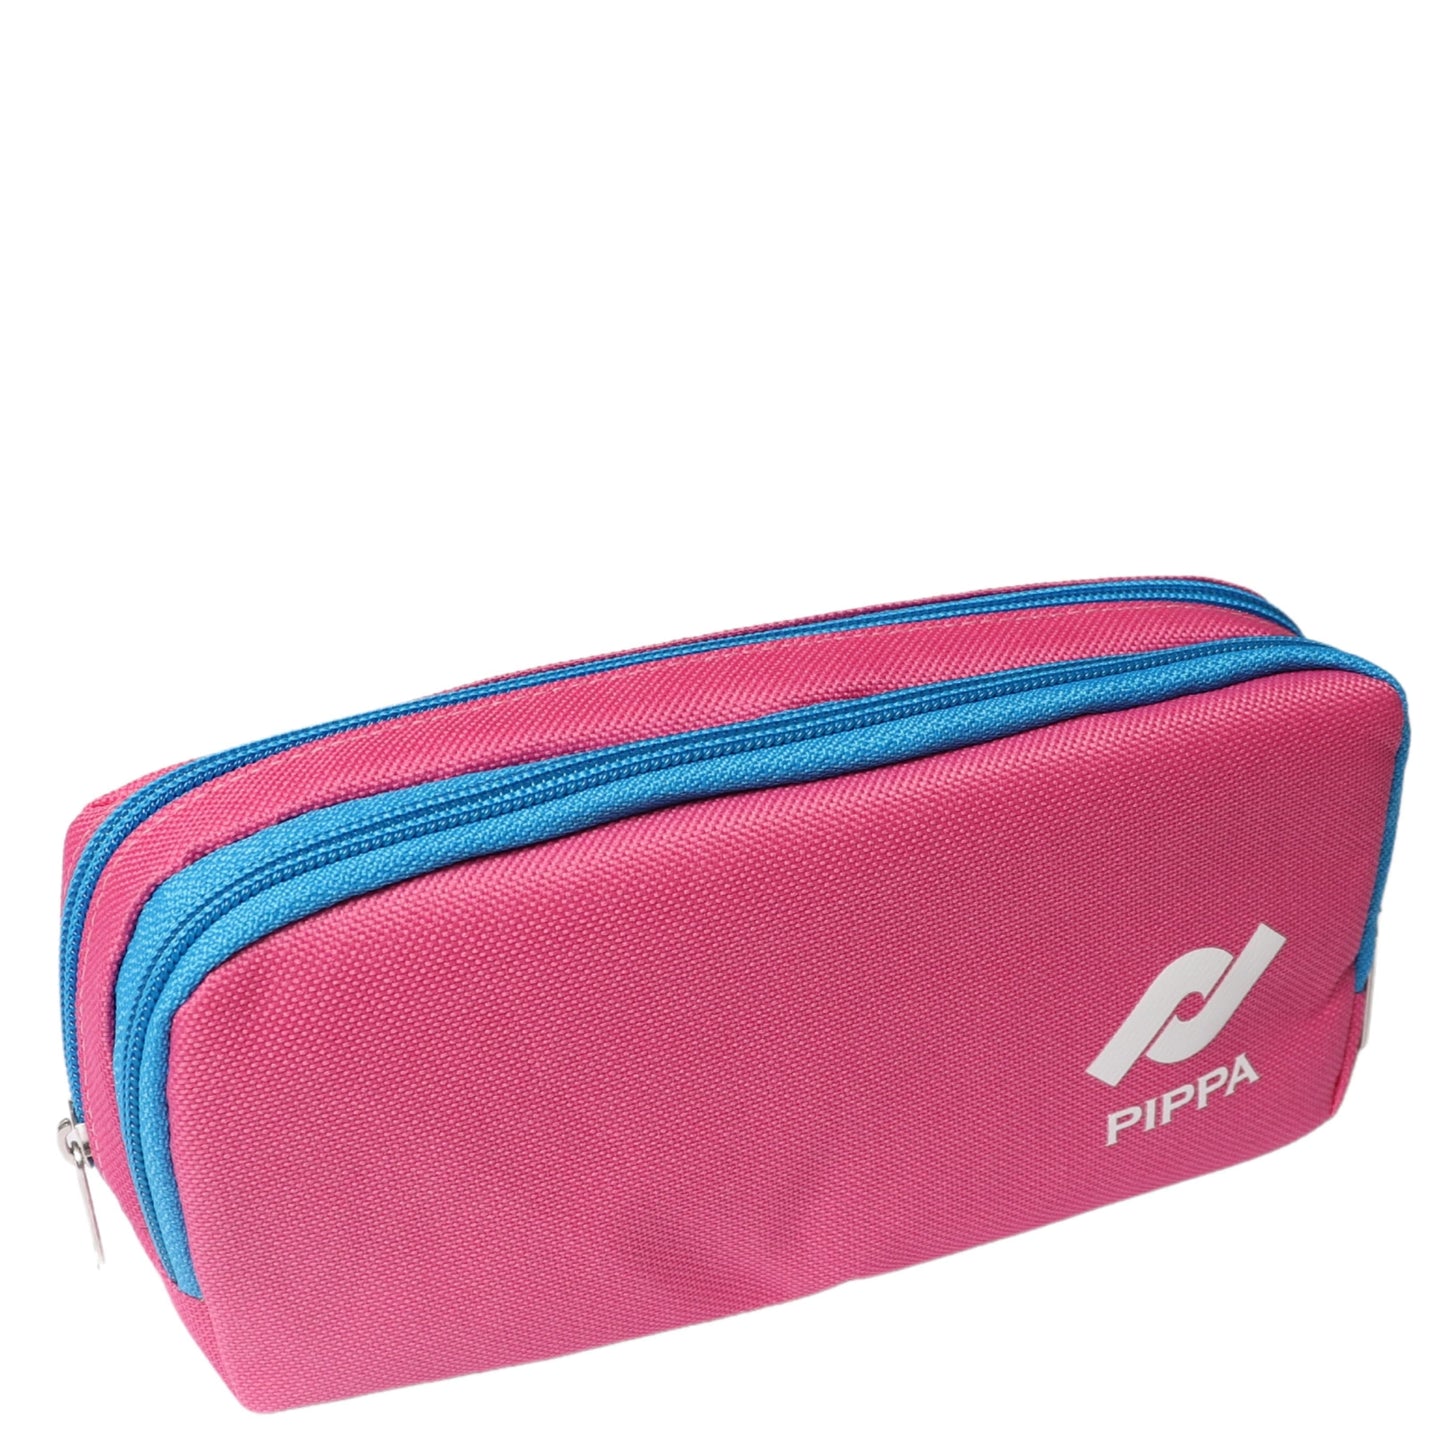 PIPPA School Bags & Supplies Pink PIPPA - Pencil Case 2 Zippers